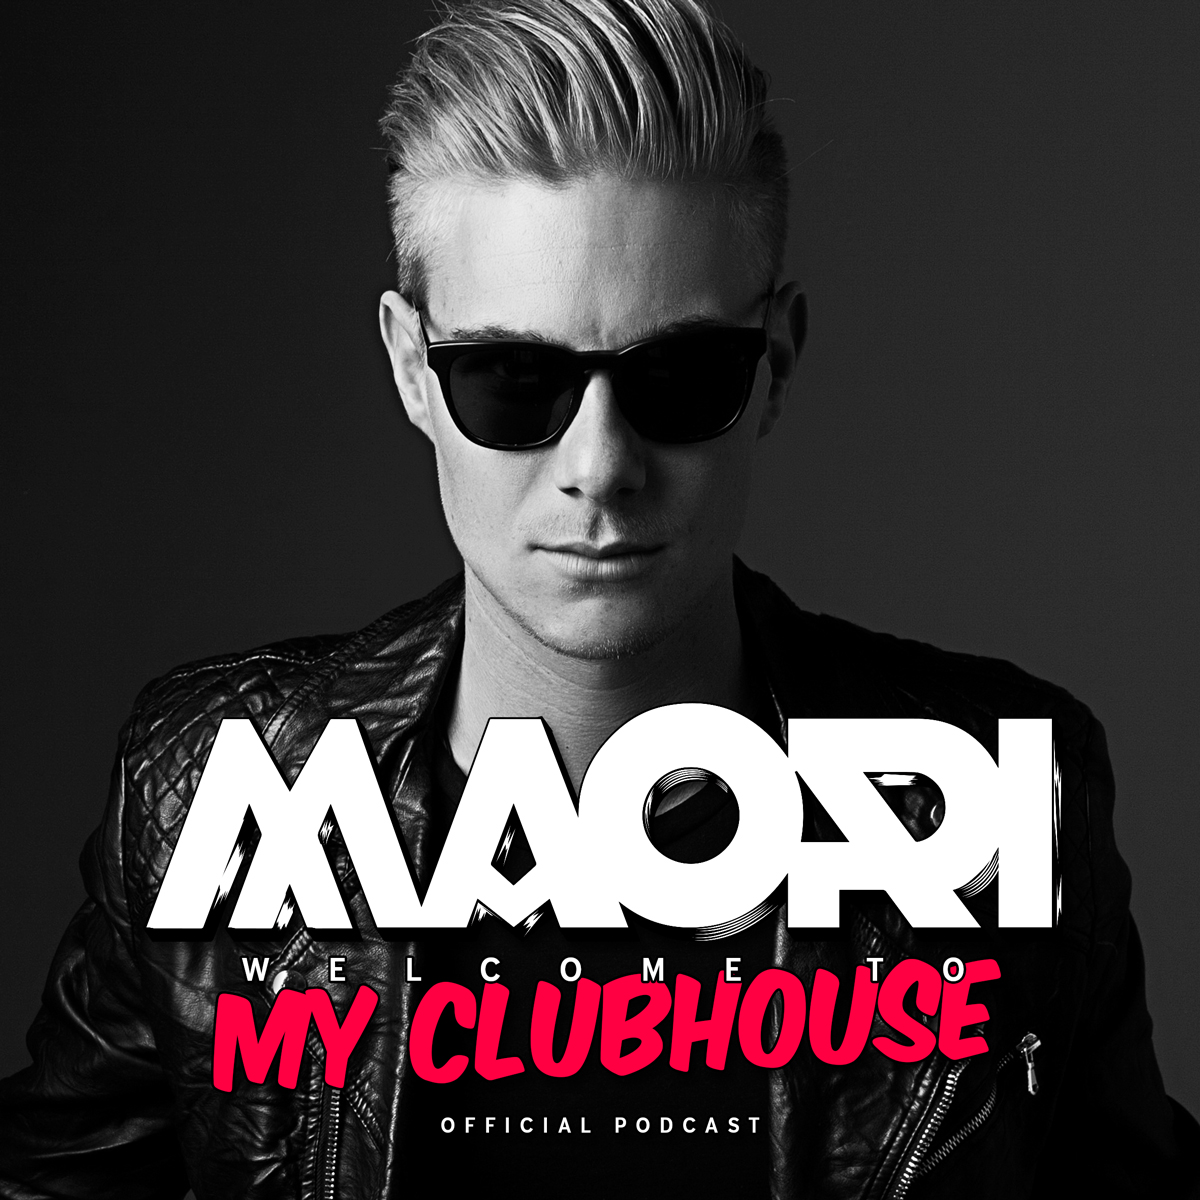 My Clubhouse by Maori - Podcast #029